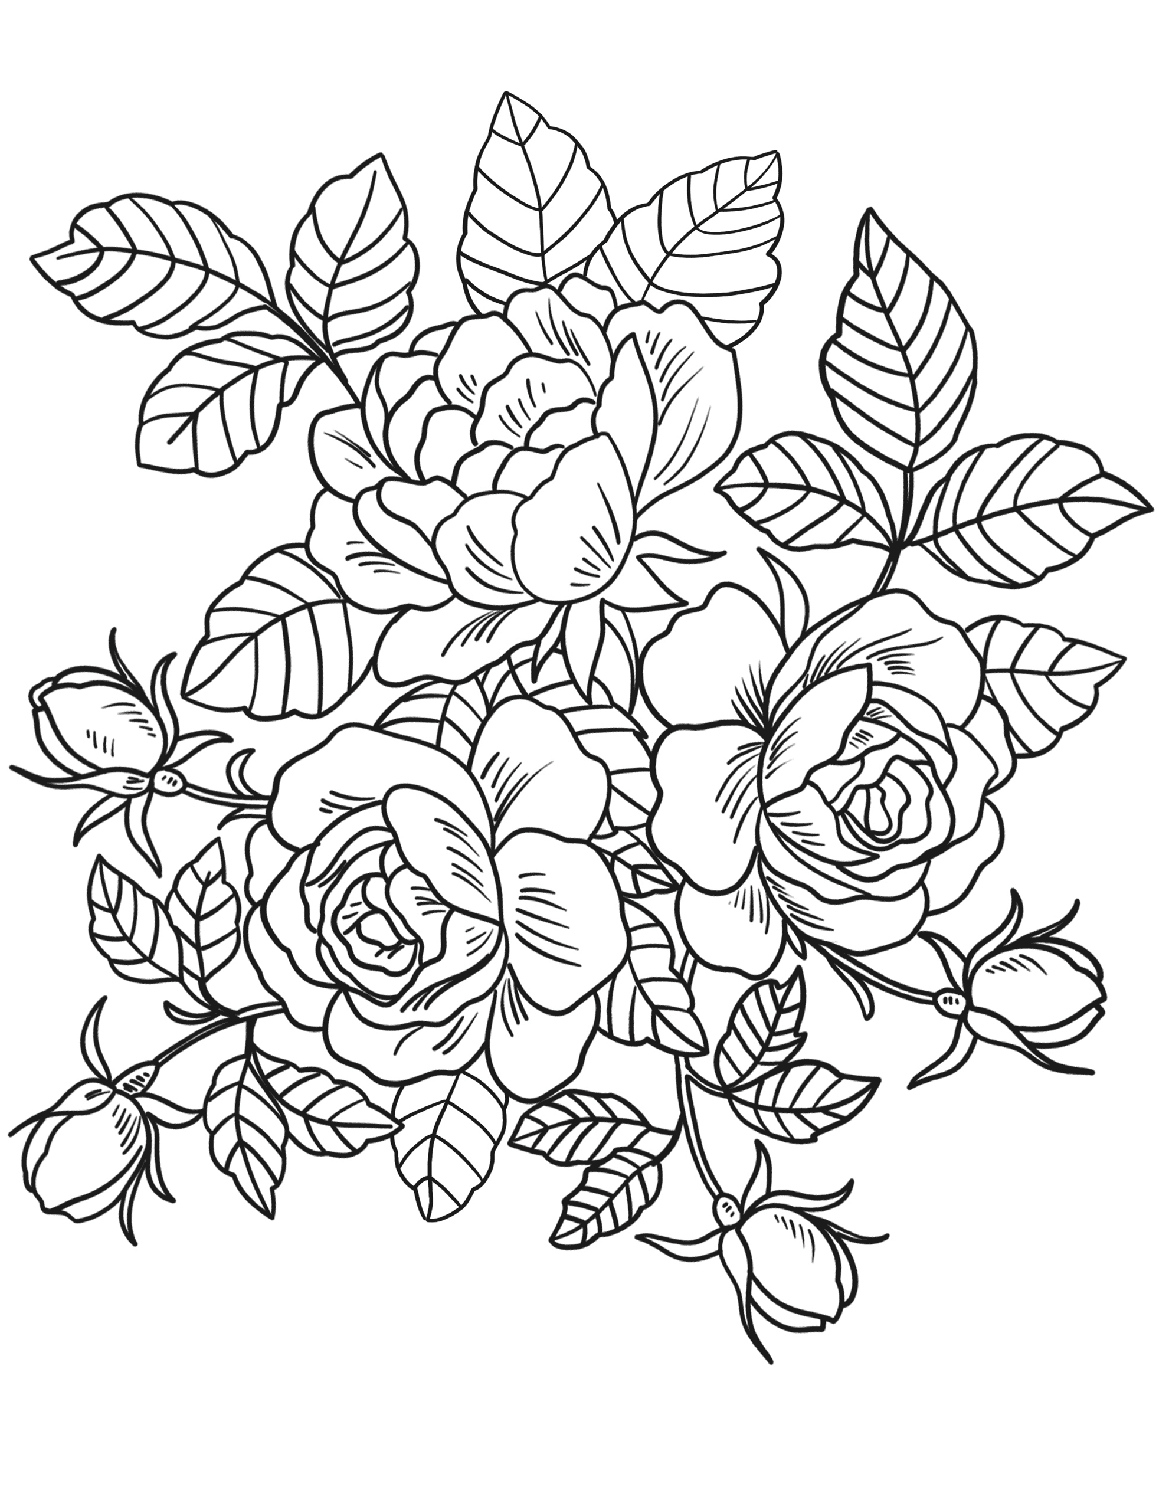 Floral Coloring Pages for Adults - Best Coloring Pages For ...